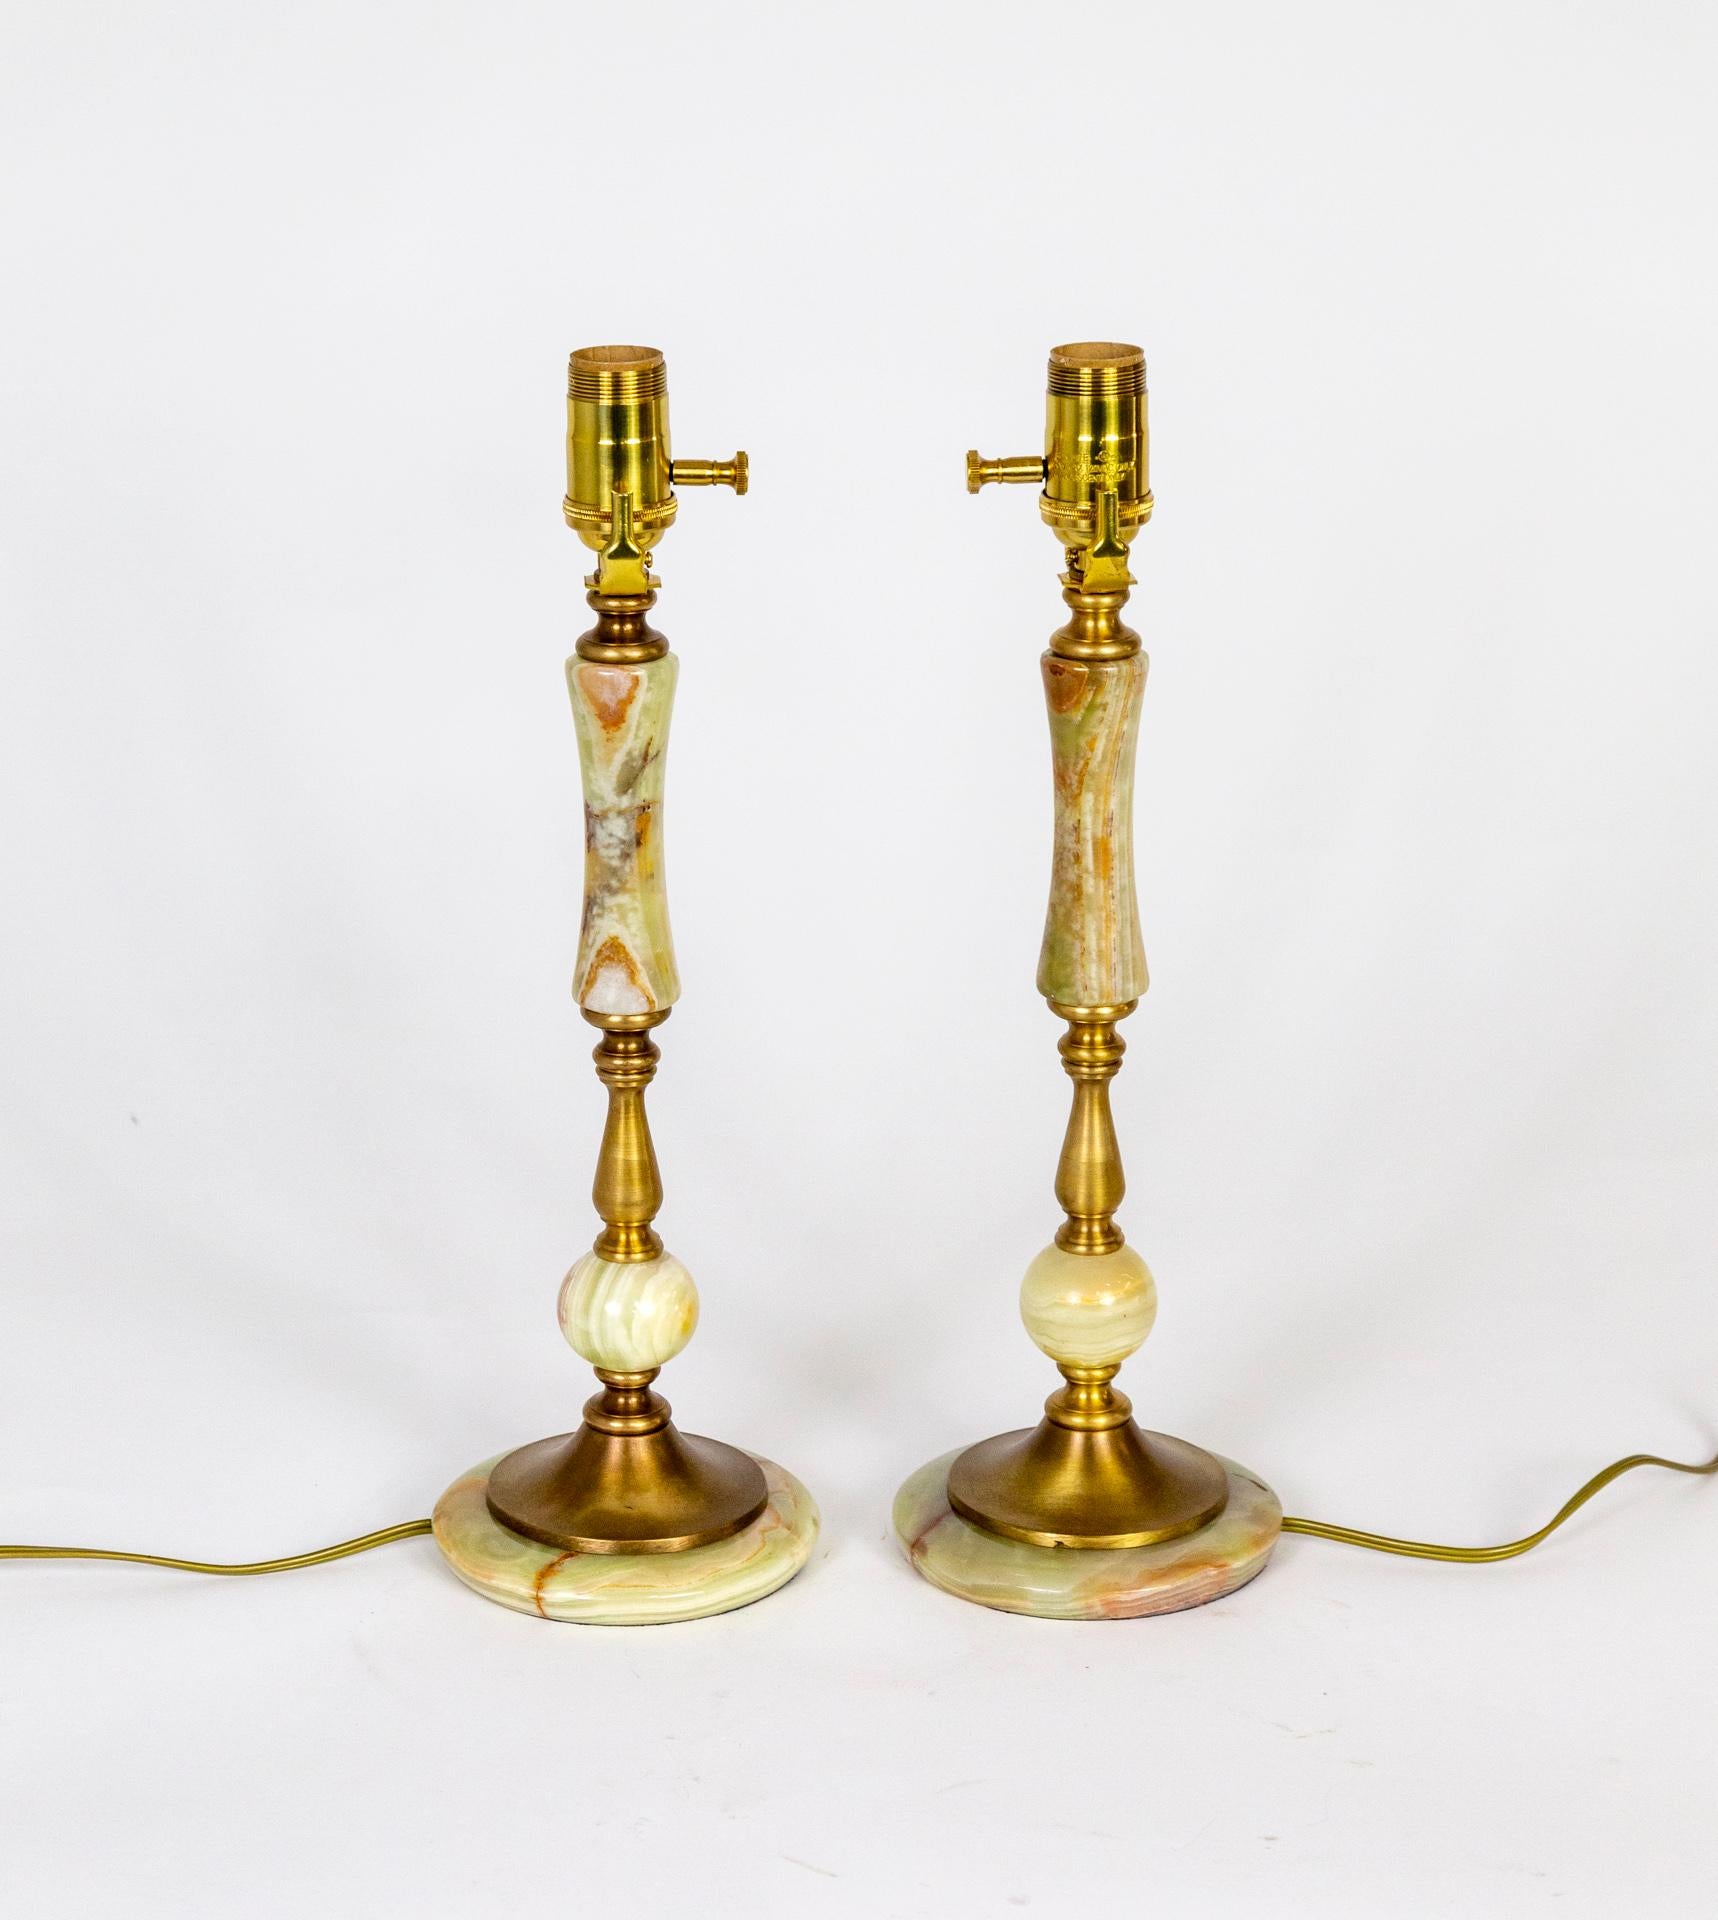 A pair of 1940s, variegated light green onyx lamps with shades of cream and rust tones, and brass pieces integrated in the form. Newly wired with dimming sockets. 5